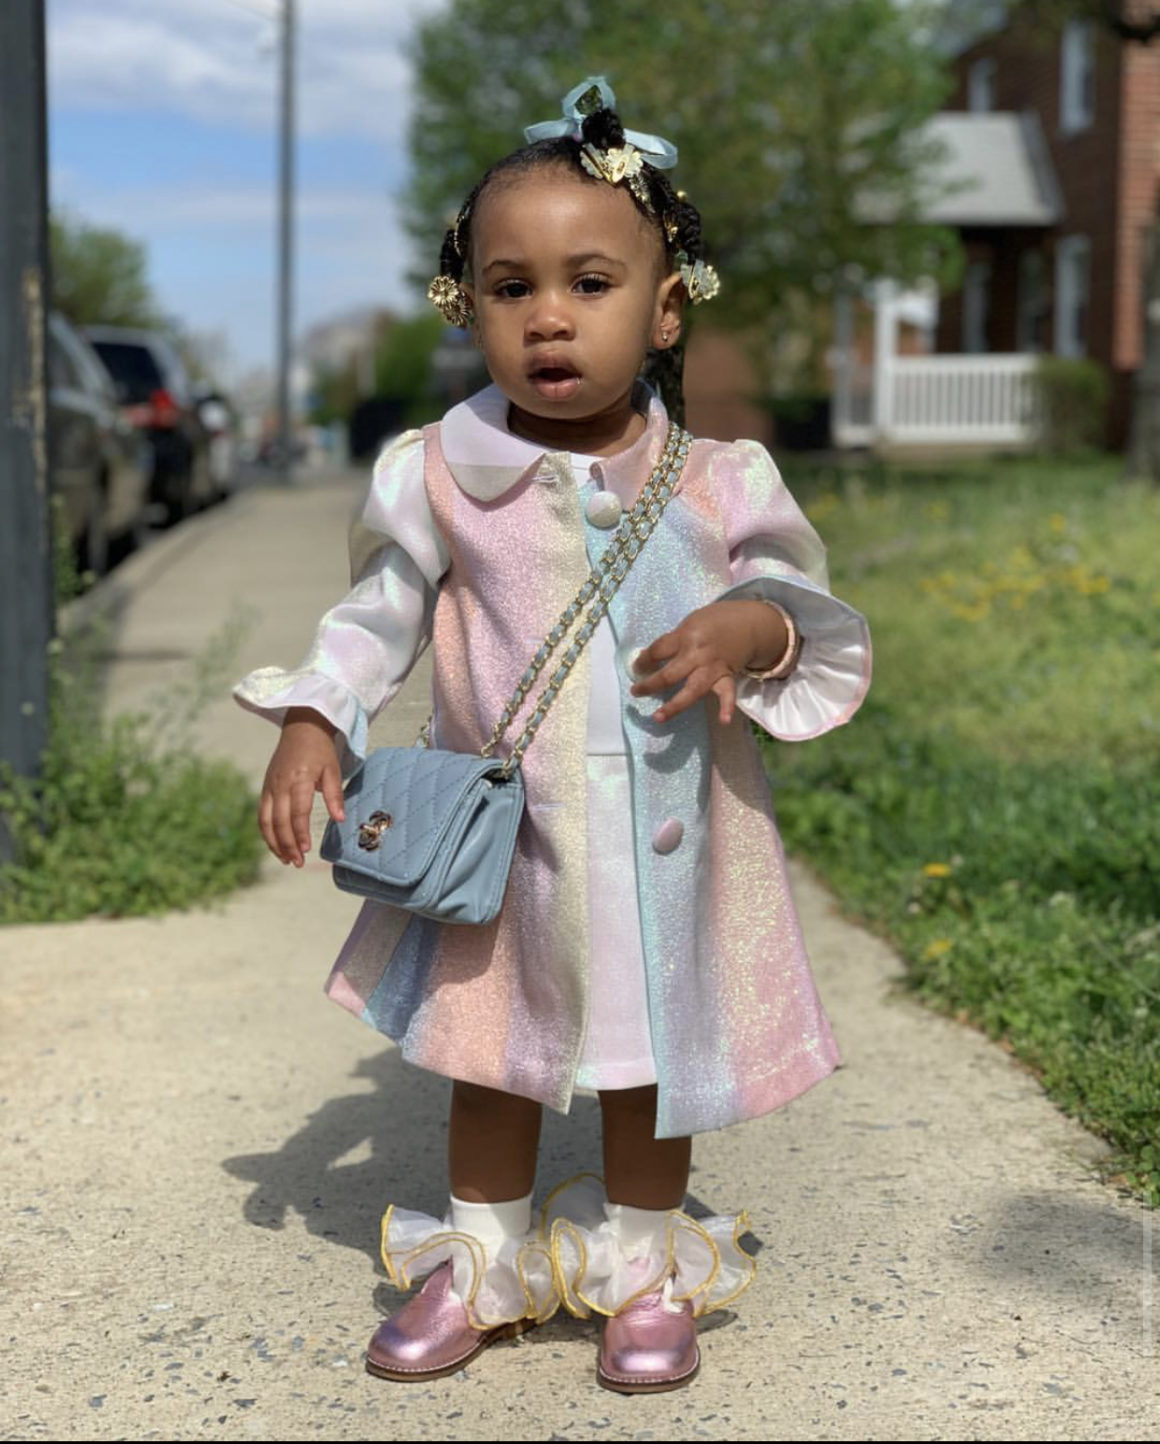 Fashion Bomb Kid of the Week: Kiersten from New Jersey – Fashion Bomb Daily